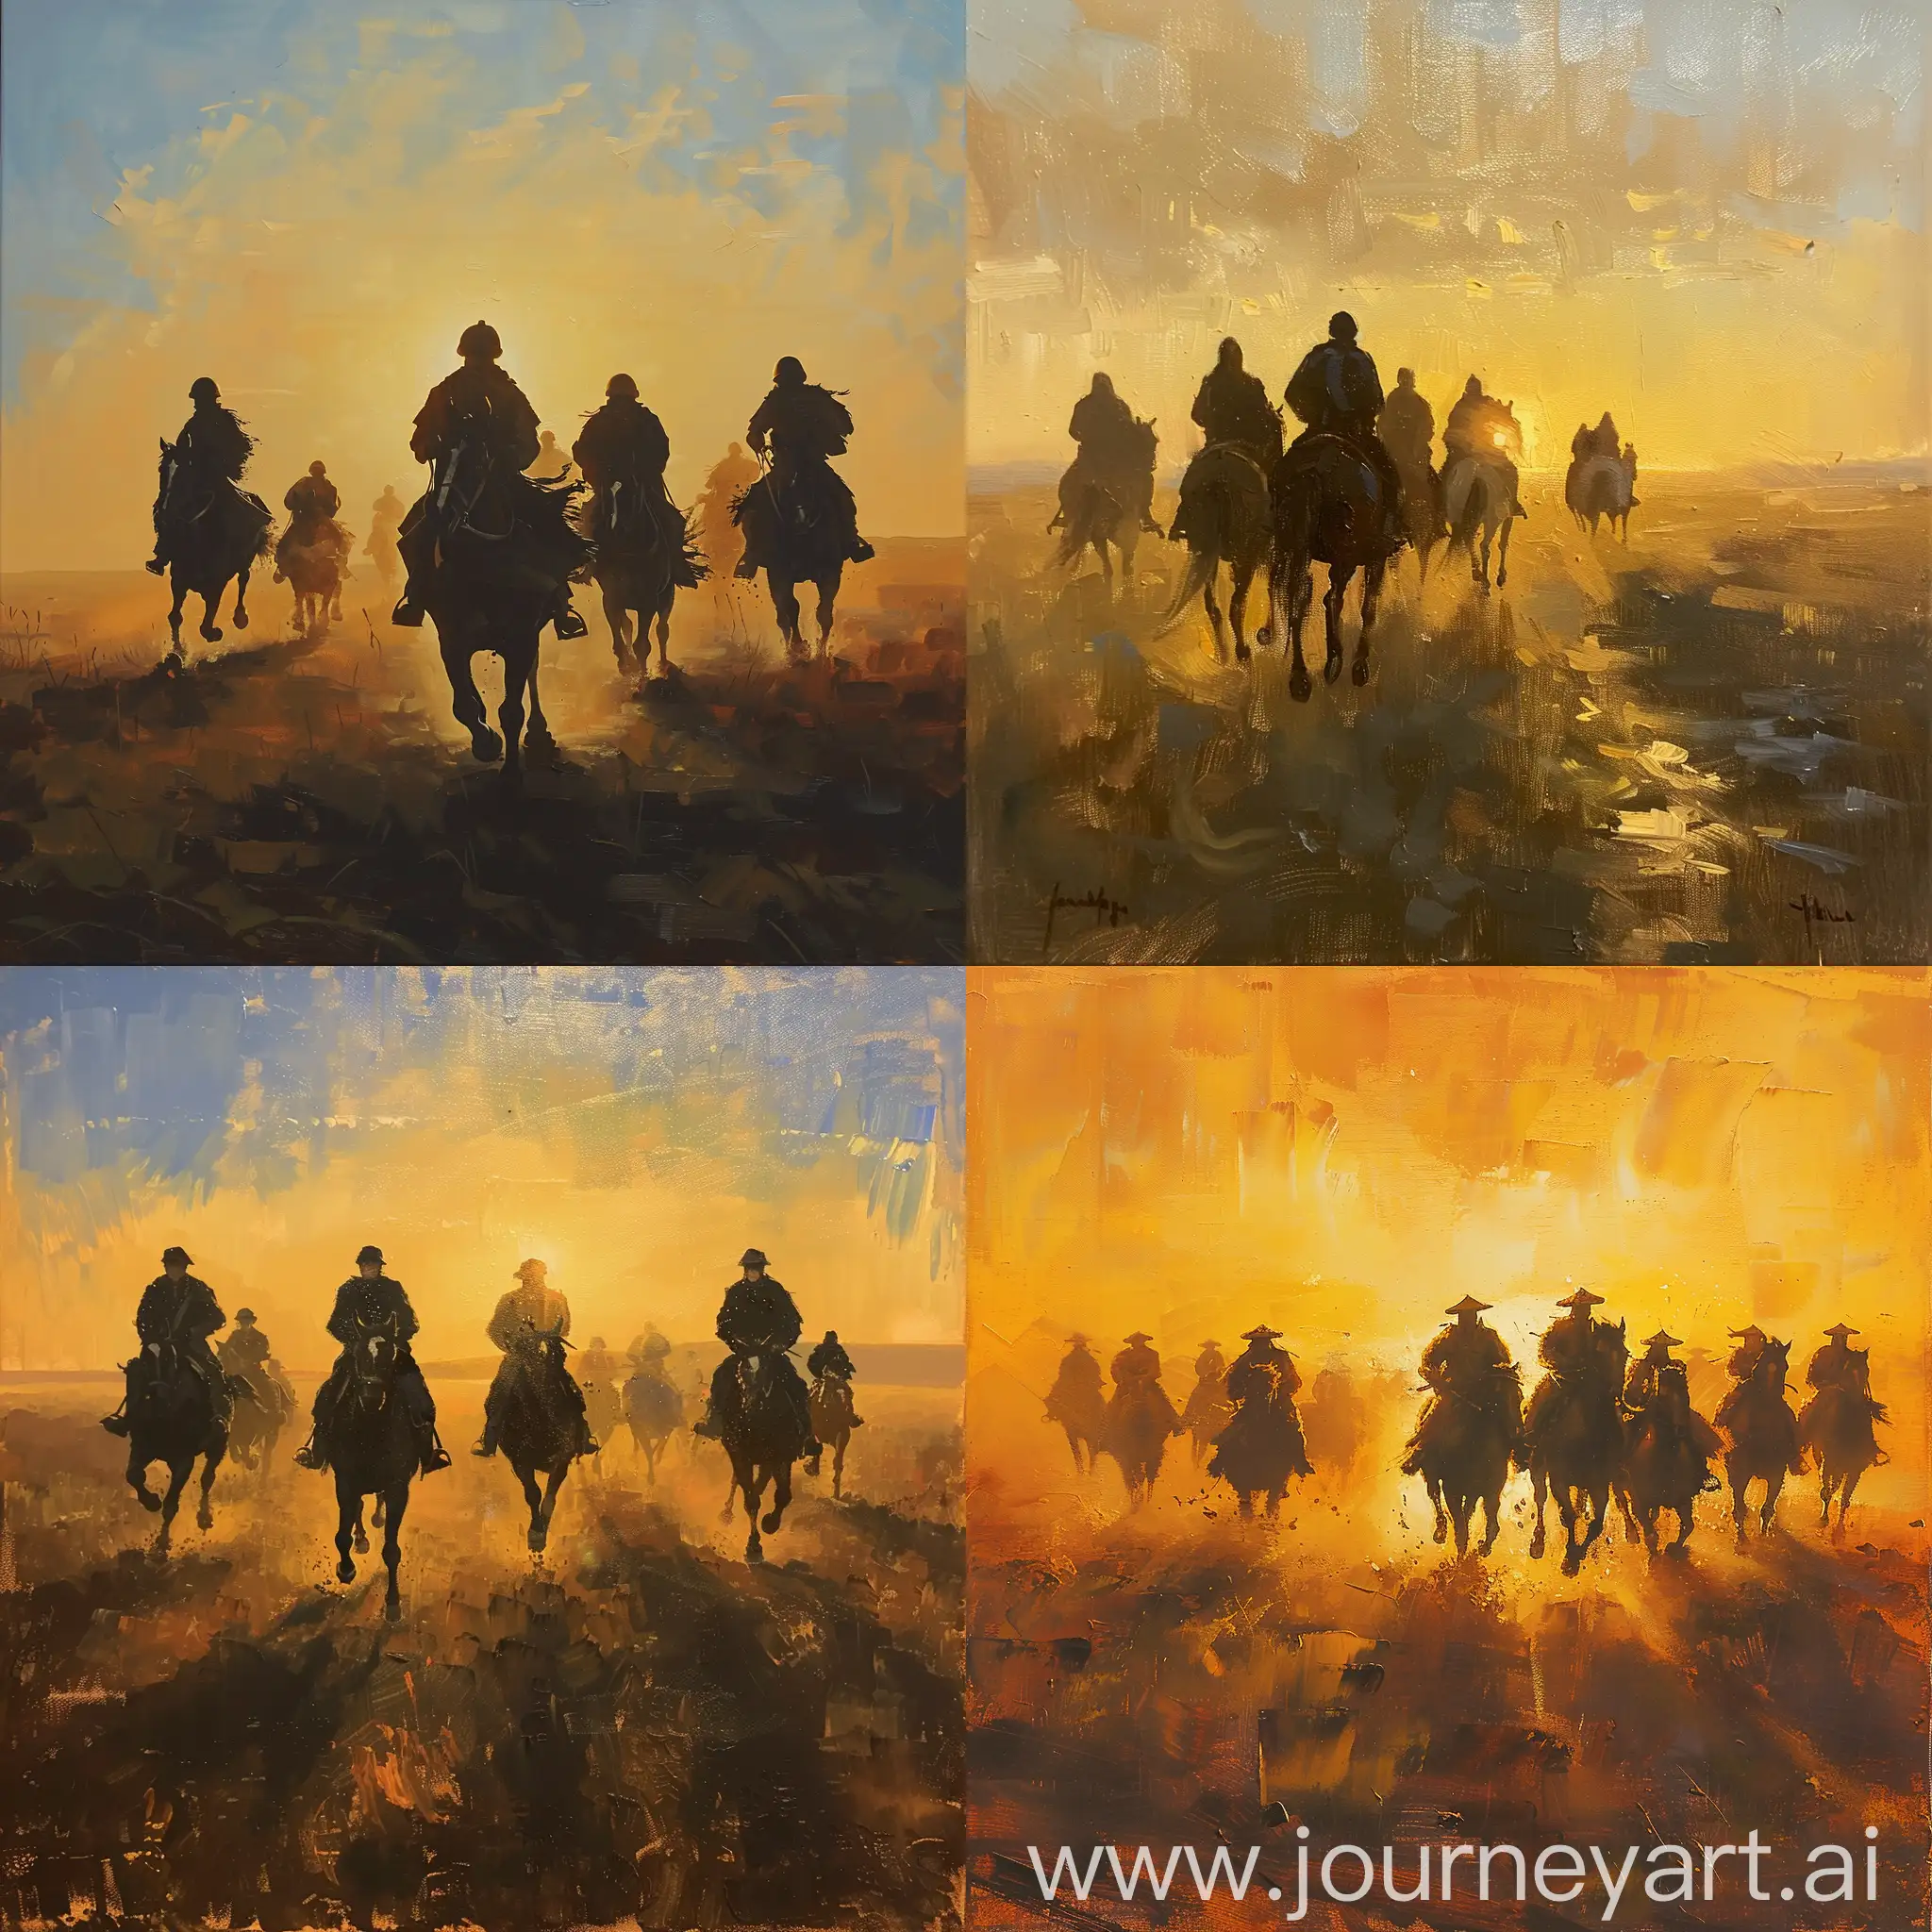 "Amidst the vast expanse of the Mongolian steppe, a group of nomadic cavalry riders gallops across the horizon, their silhouettes blending with the golden hues of the setting sun. Capture the dynamic energy and rugged beauty of this scene in an oil painting, highlighting the timeless connection between the nomads and their majestic steeds."